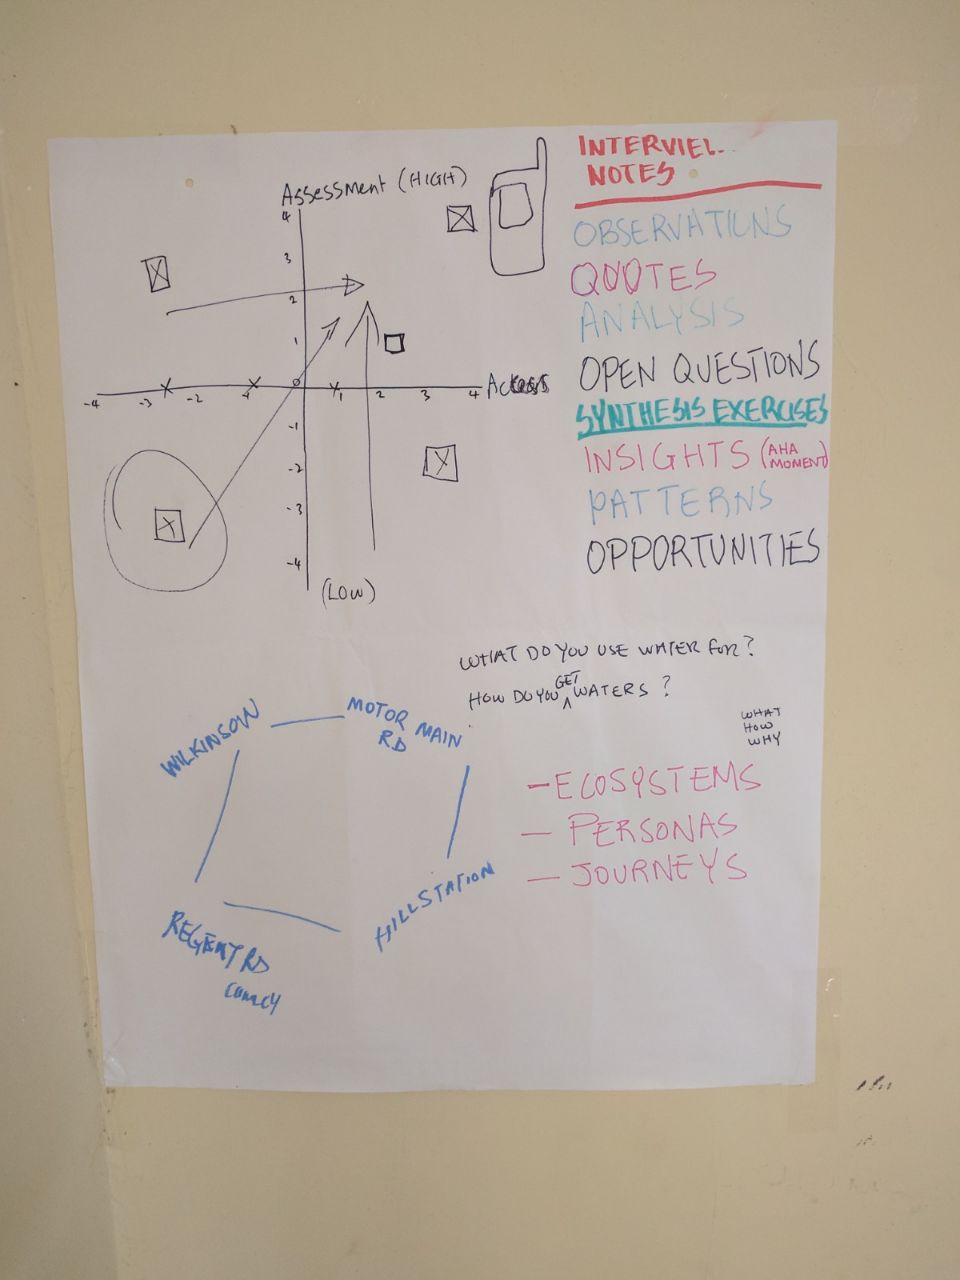 Opportunity Ideating Chart 